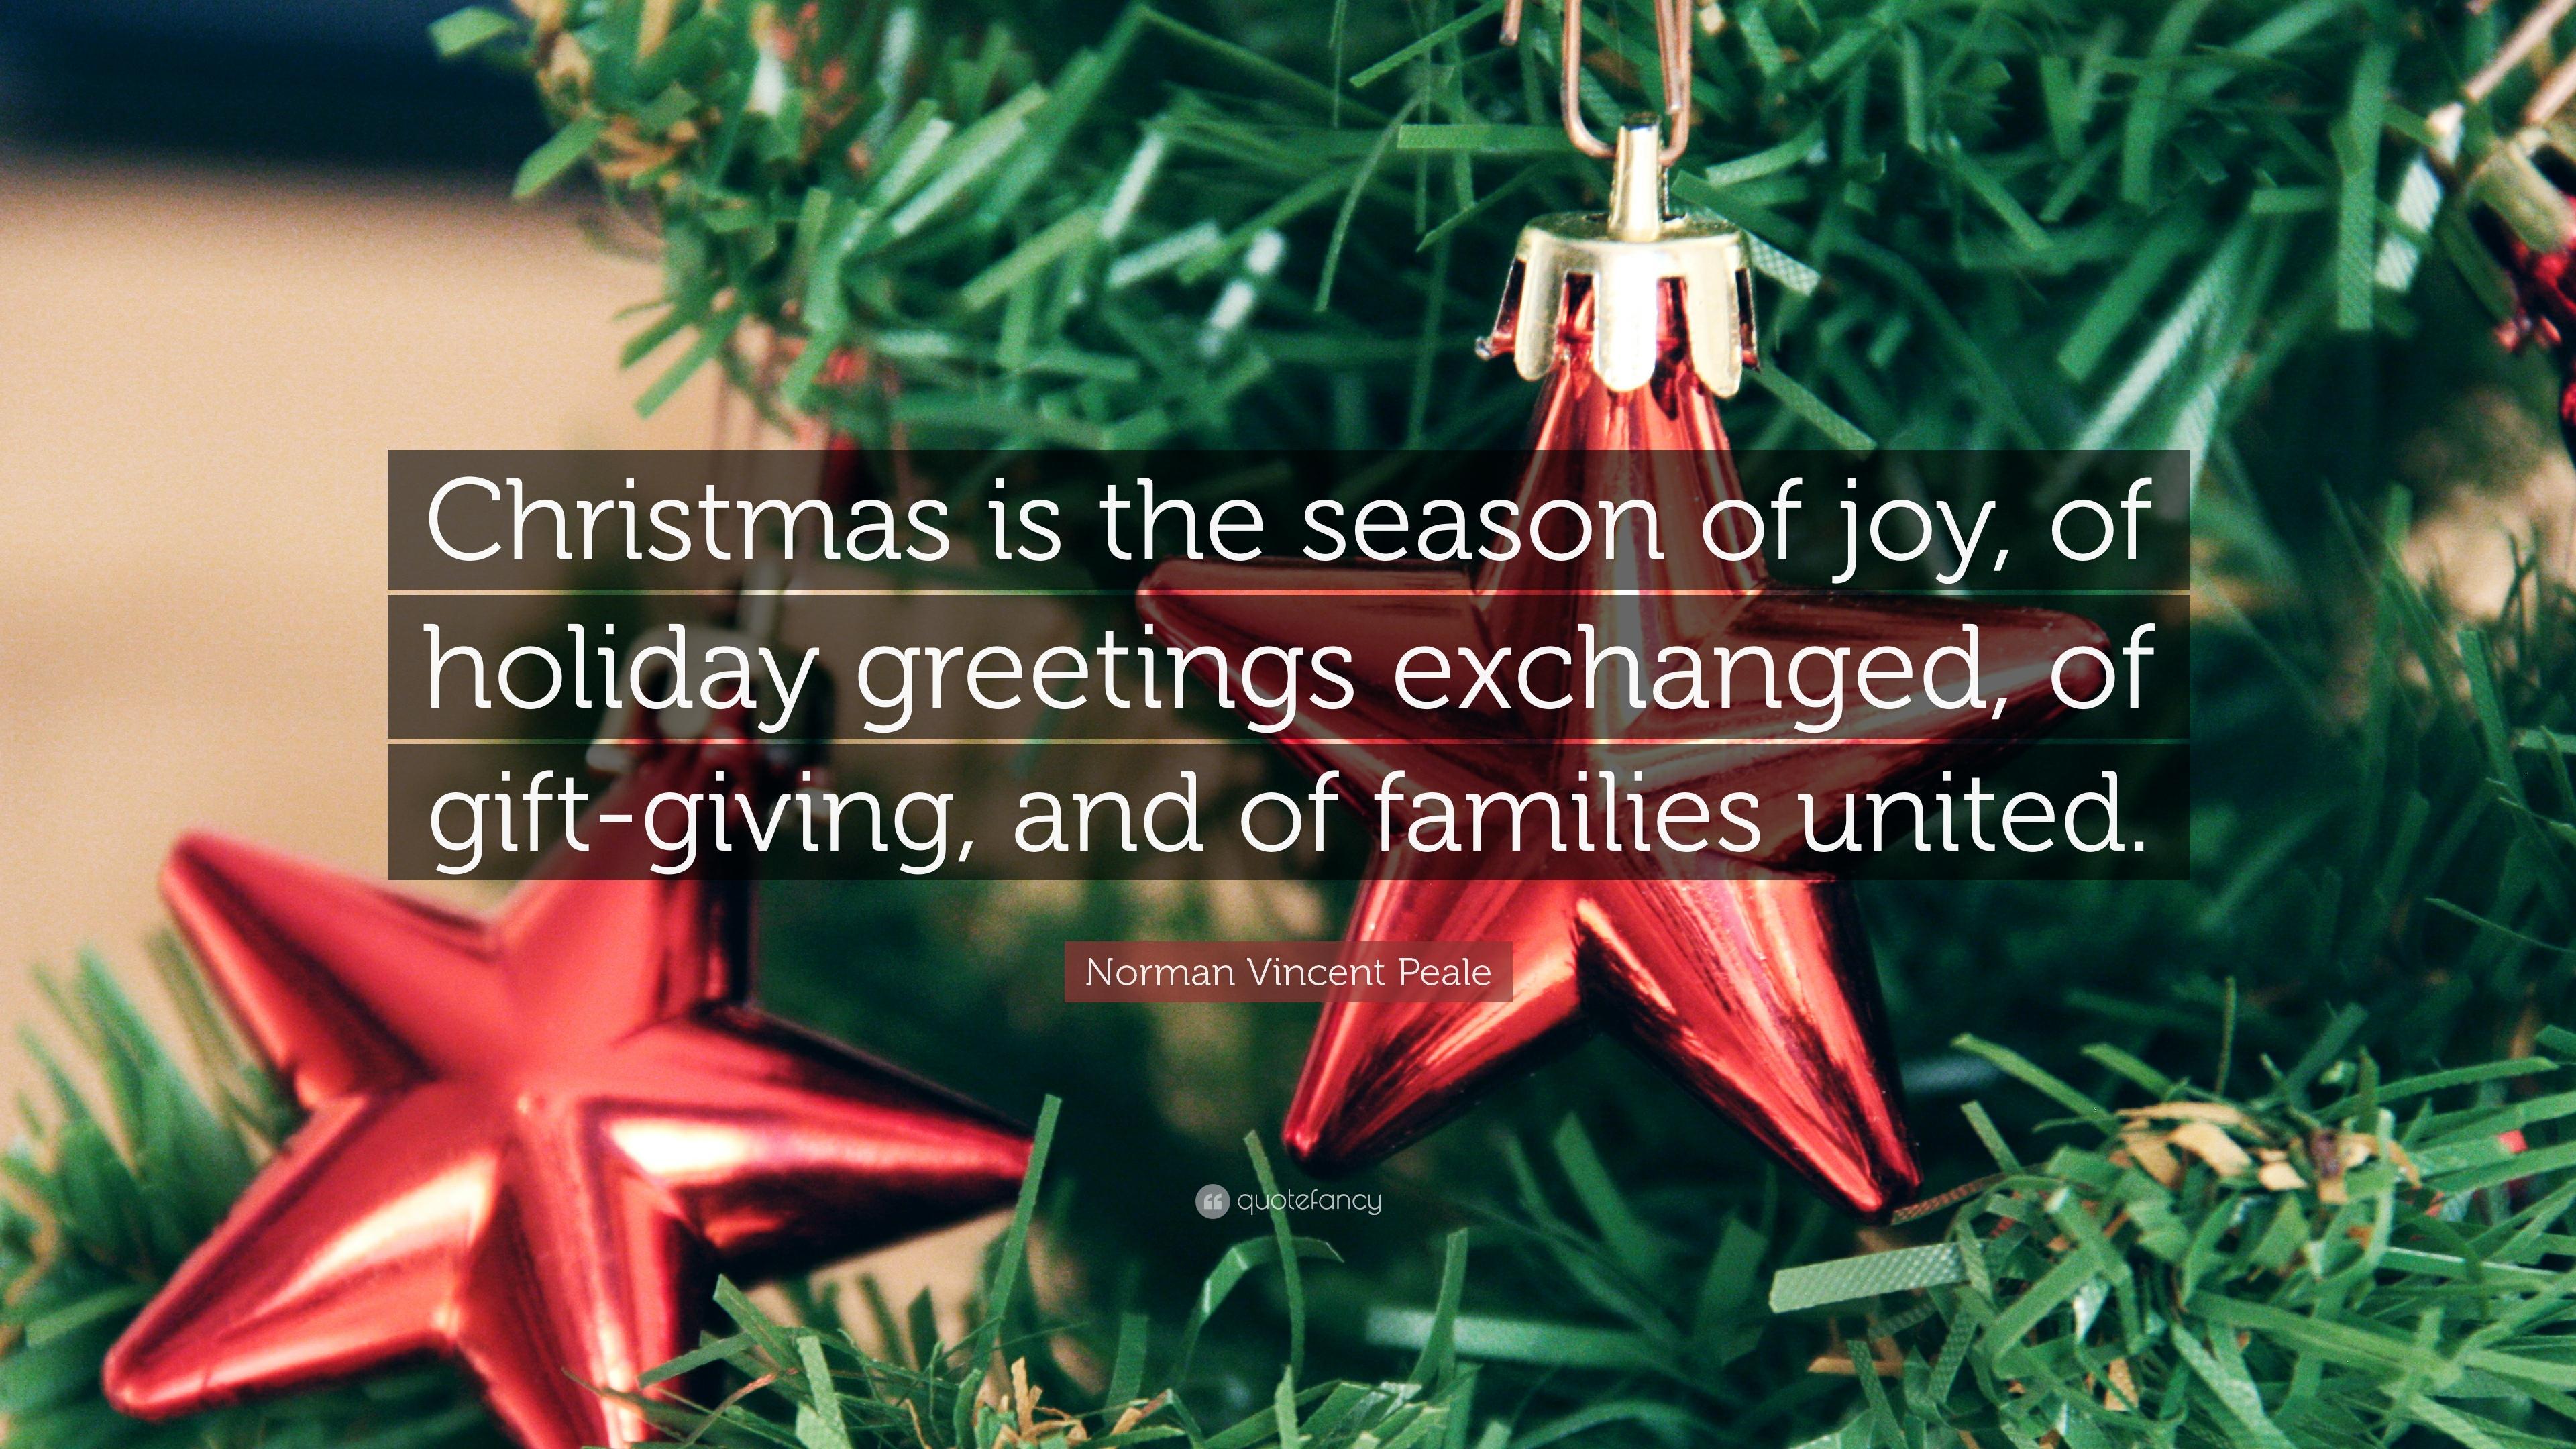 Norman Vincent Peale Quote: “Christmas is the season of joy